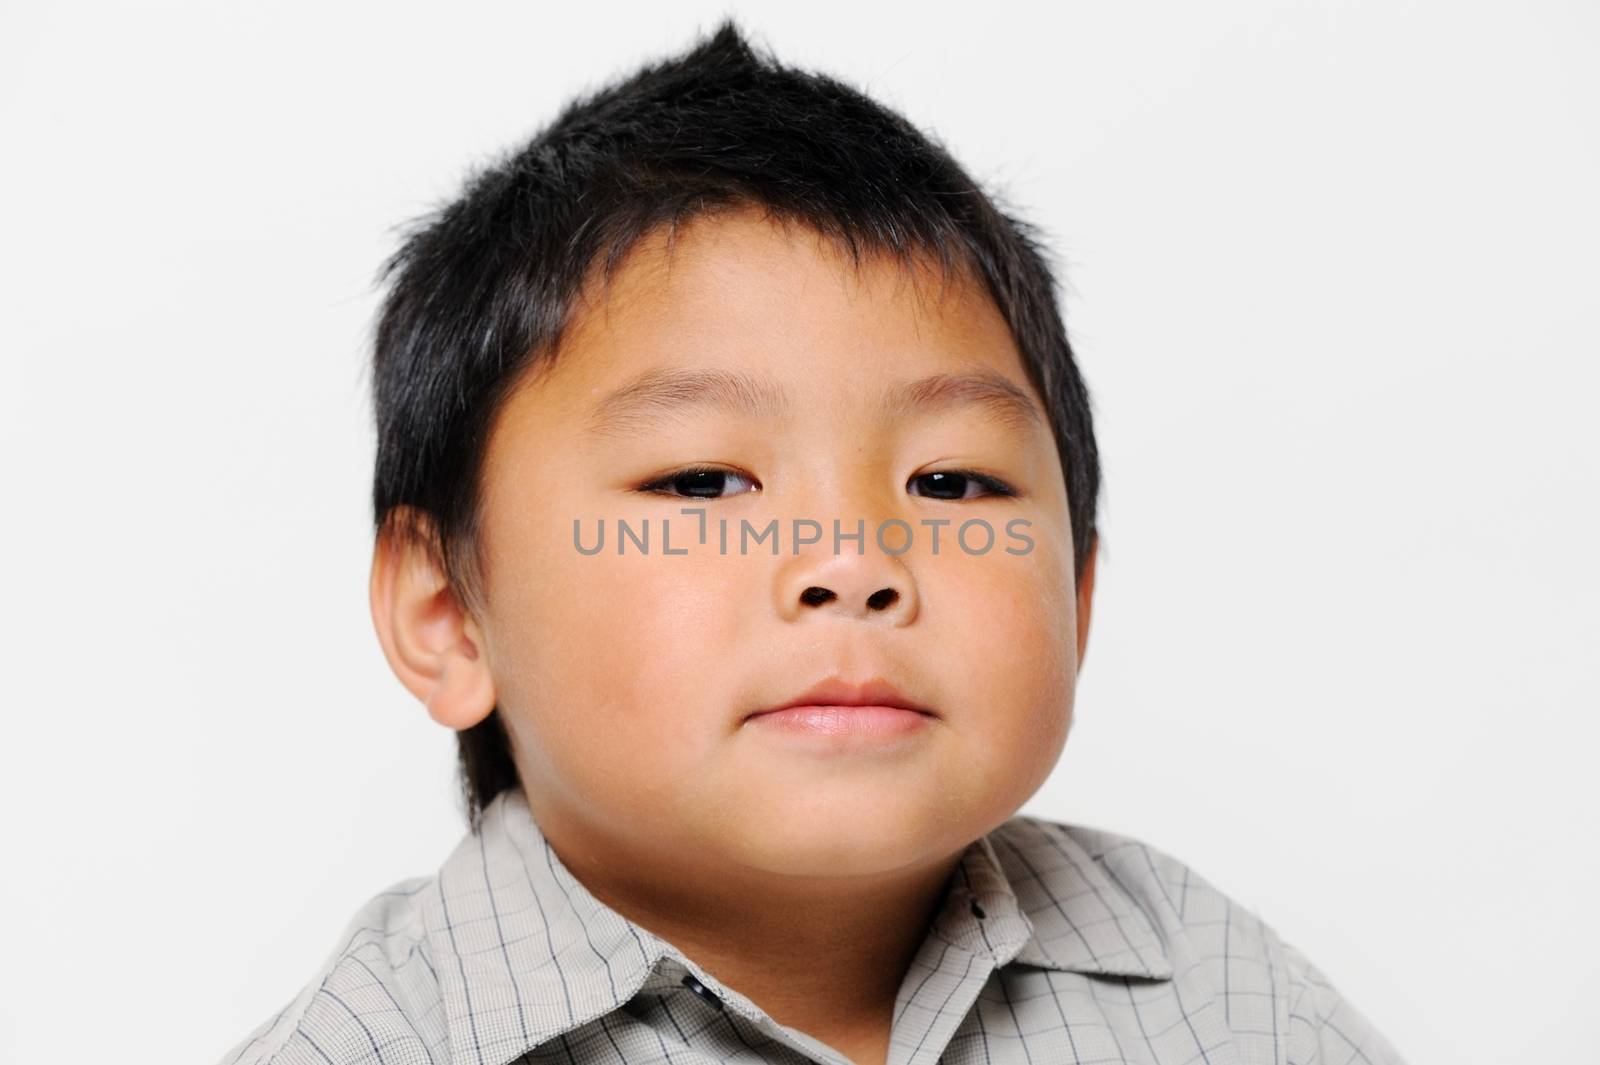 Asian boy with chubby cheeks looks serious